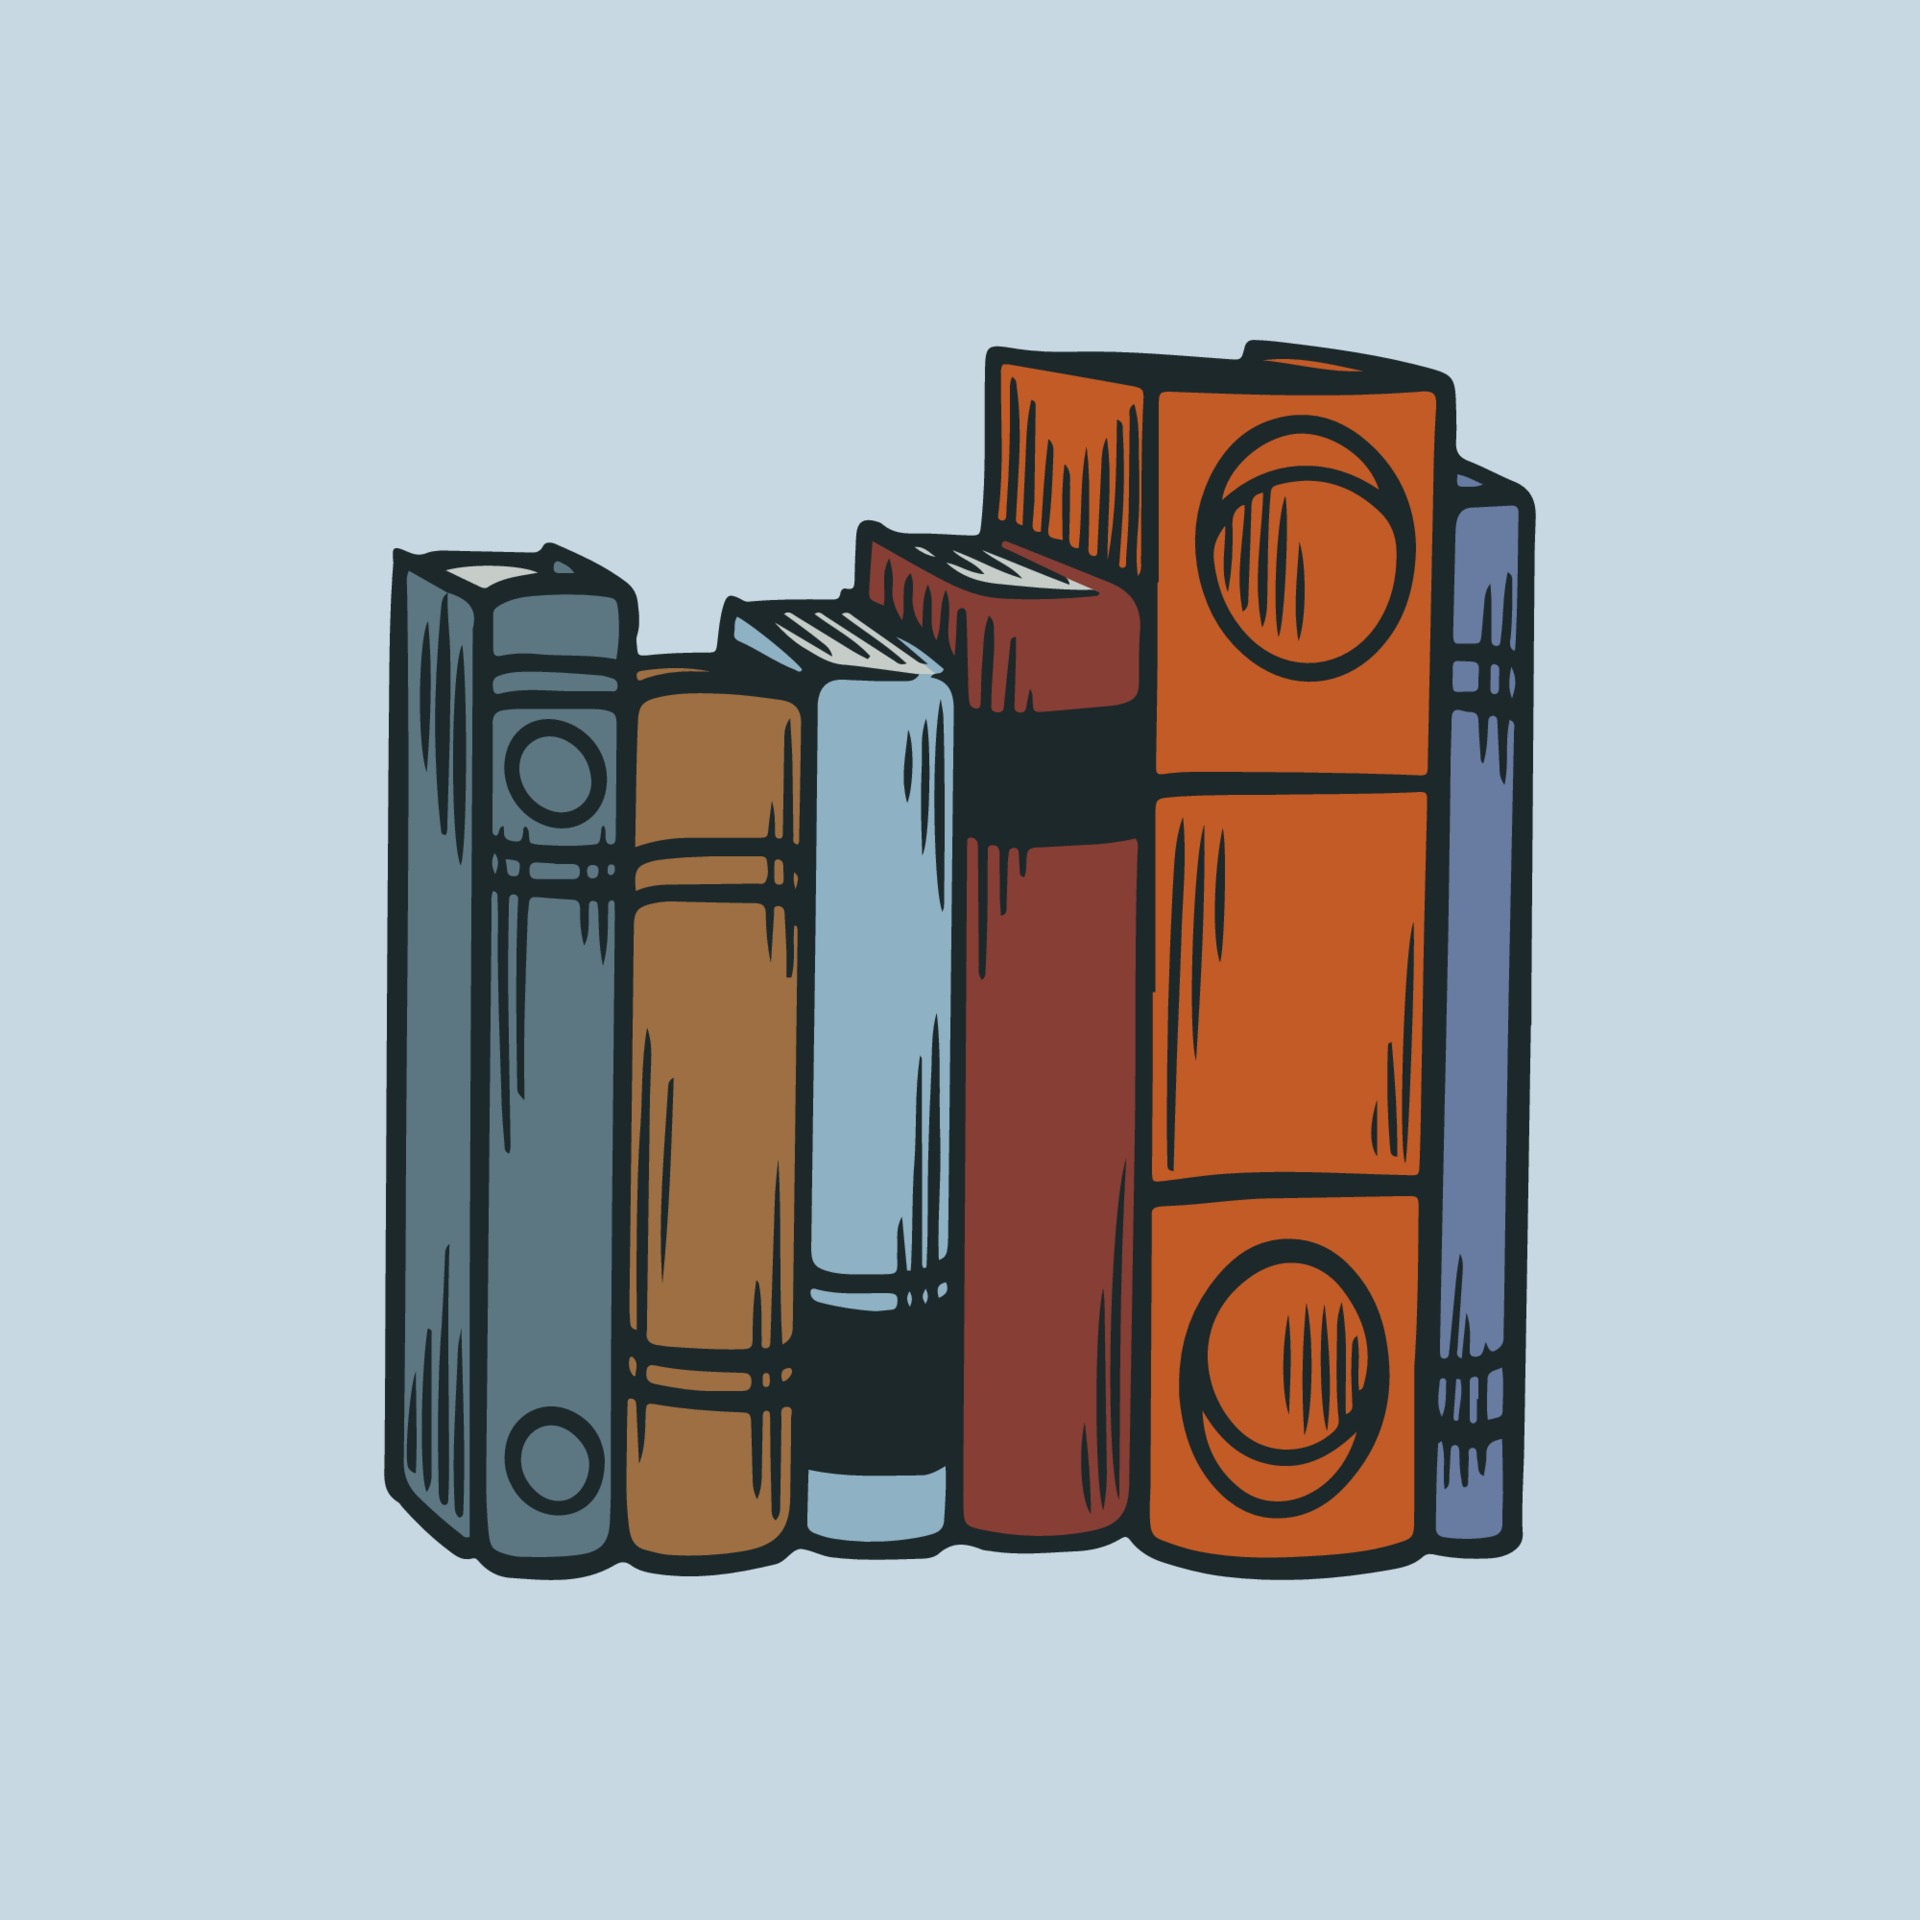 https://static.vecteezy.com/system/resources/previews/002/284/959/original/pile-of-books-stack-of-library-books-with-hand-drawn-engraving-sketch-vintage-stye-illustration-icons-library-literature-stacks-book-school-knowledge-and-education-concept-vector.jpg